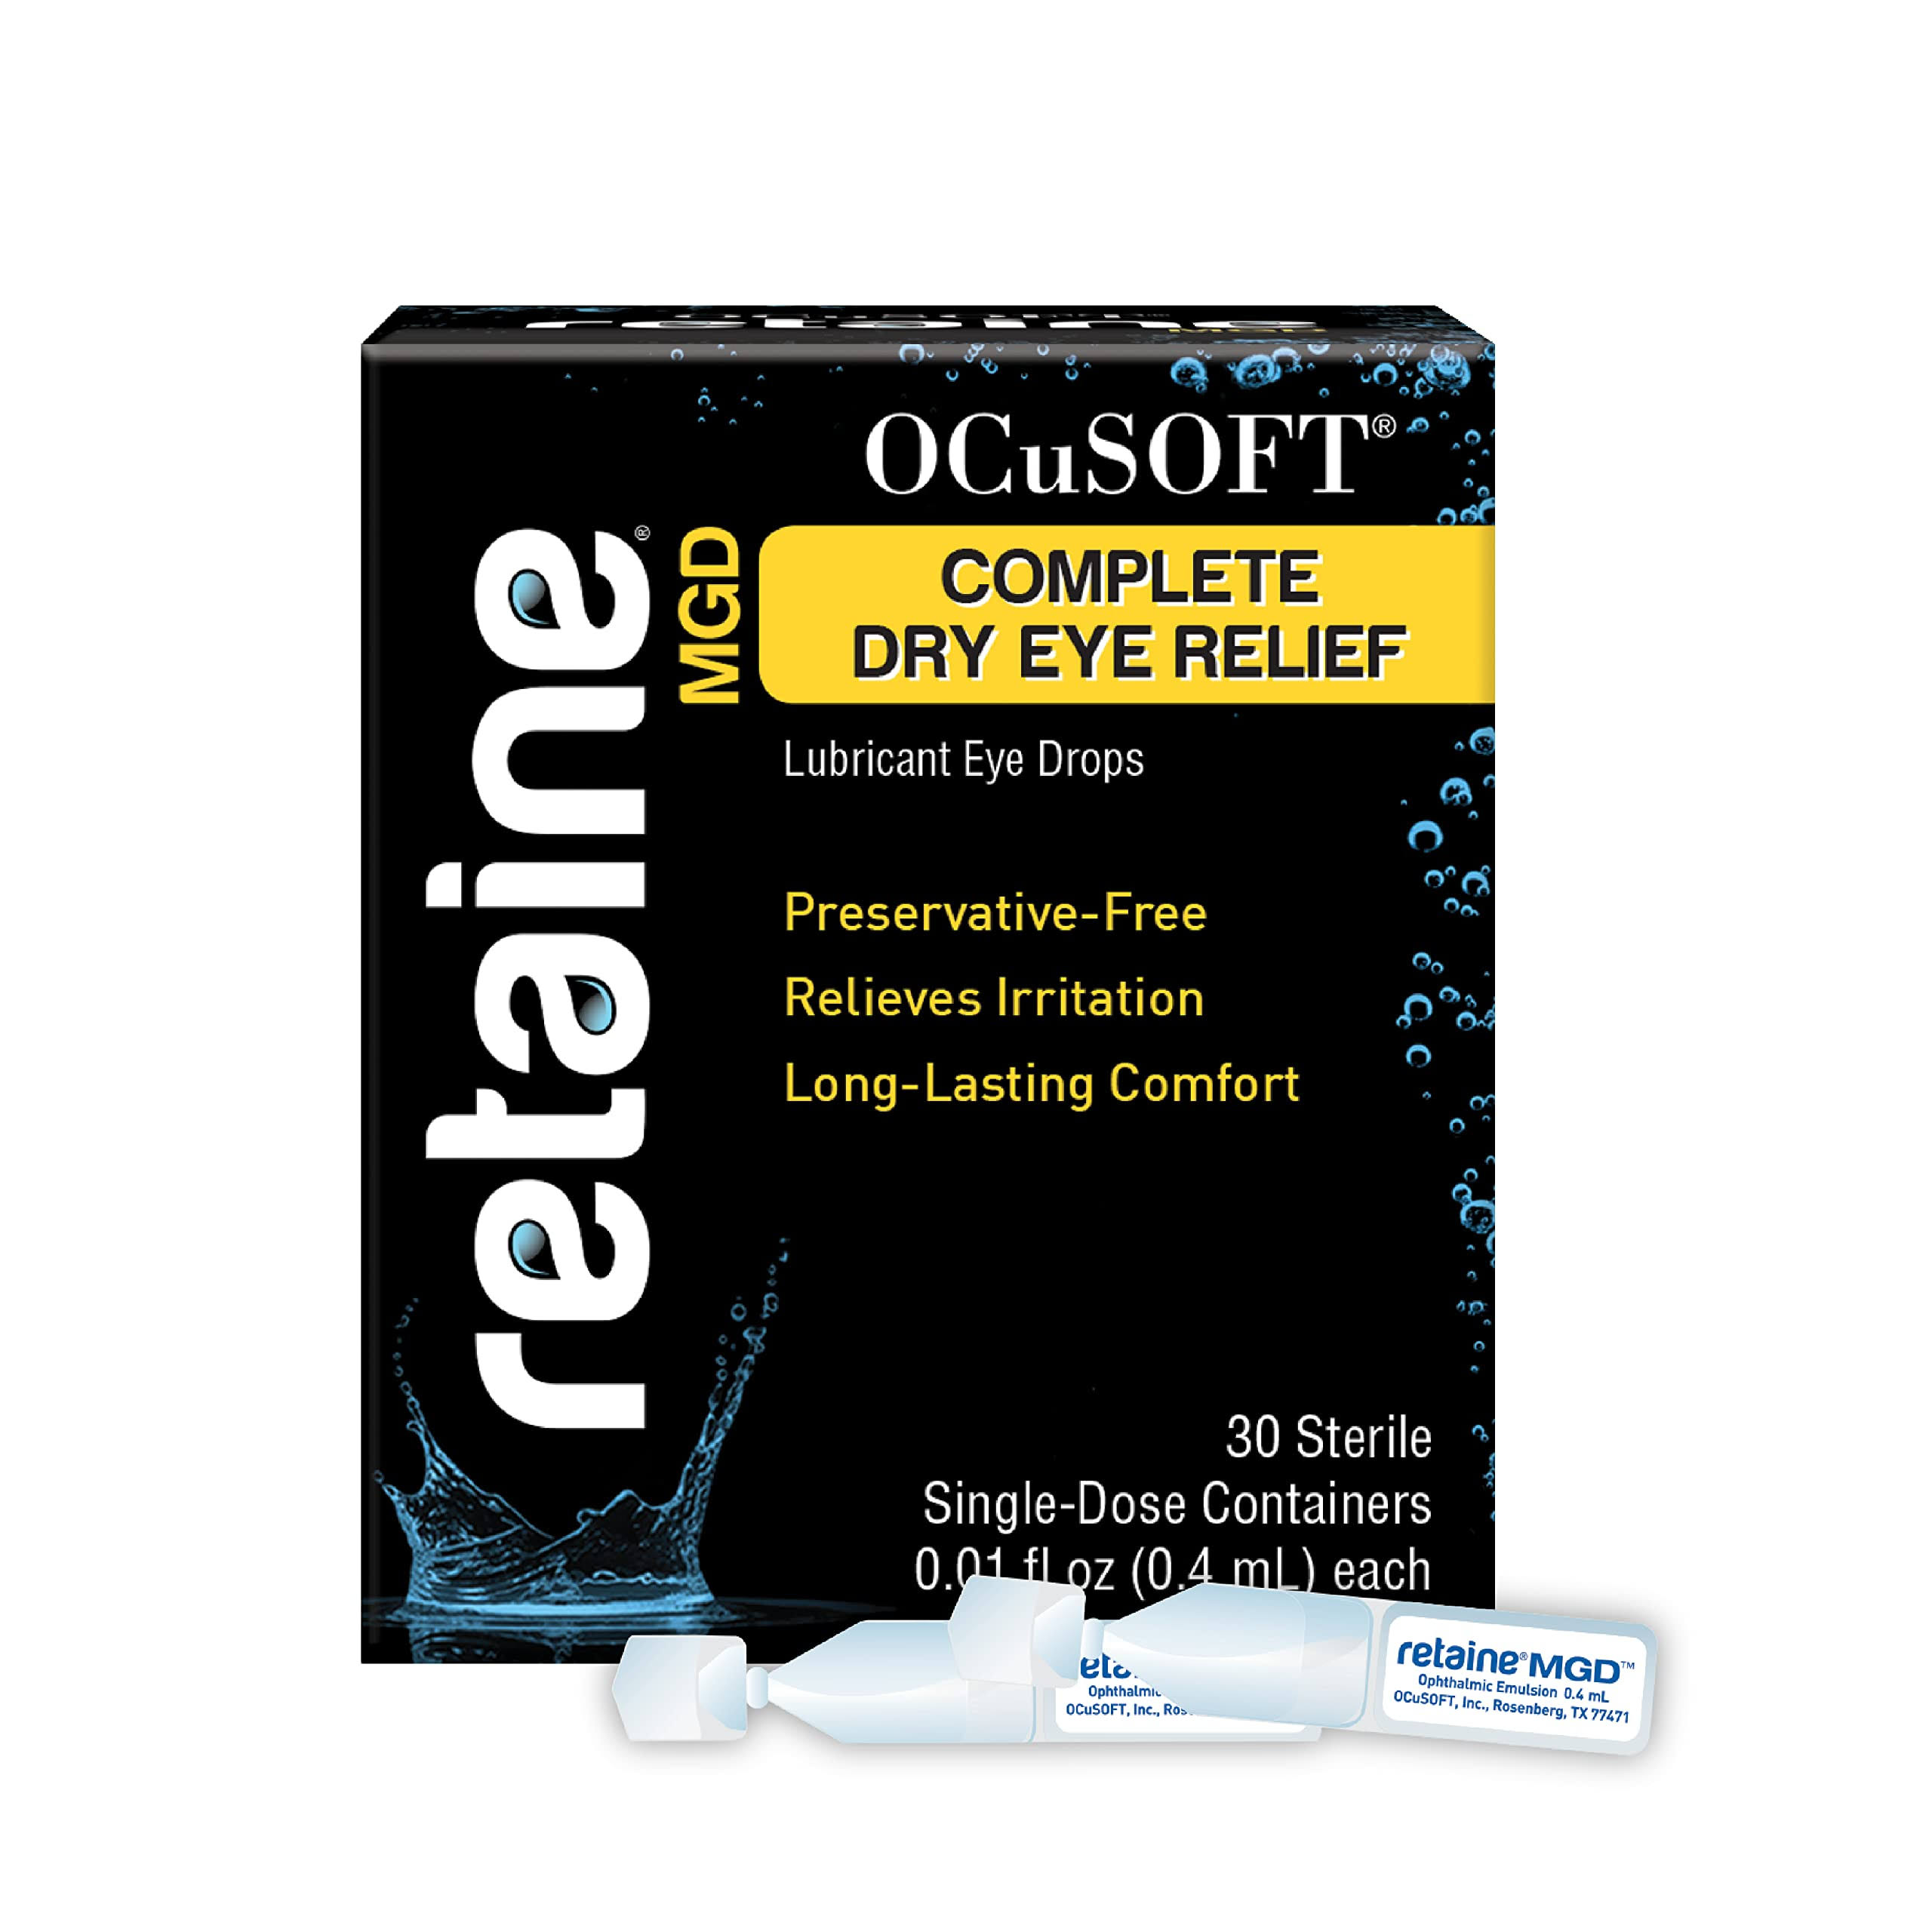 Ocusoft Retaine Mgd Complete Dry Eye Relief - 30 Sterile Single-Dose Containers